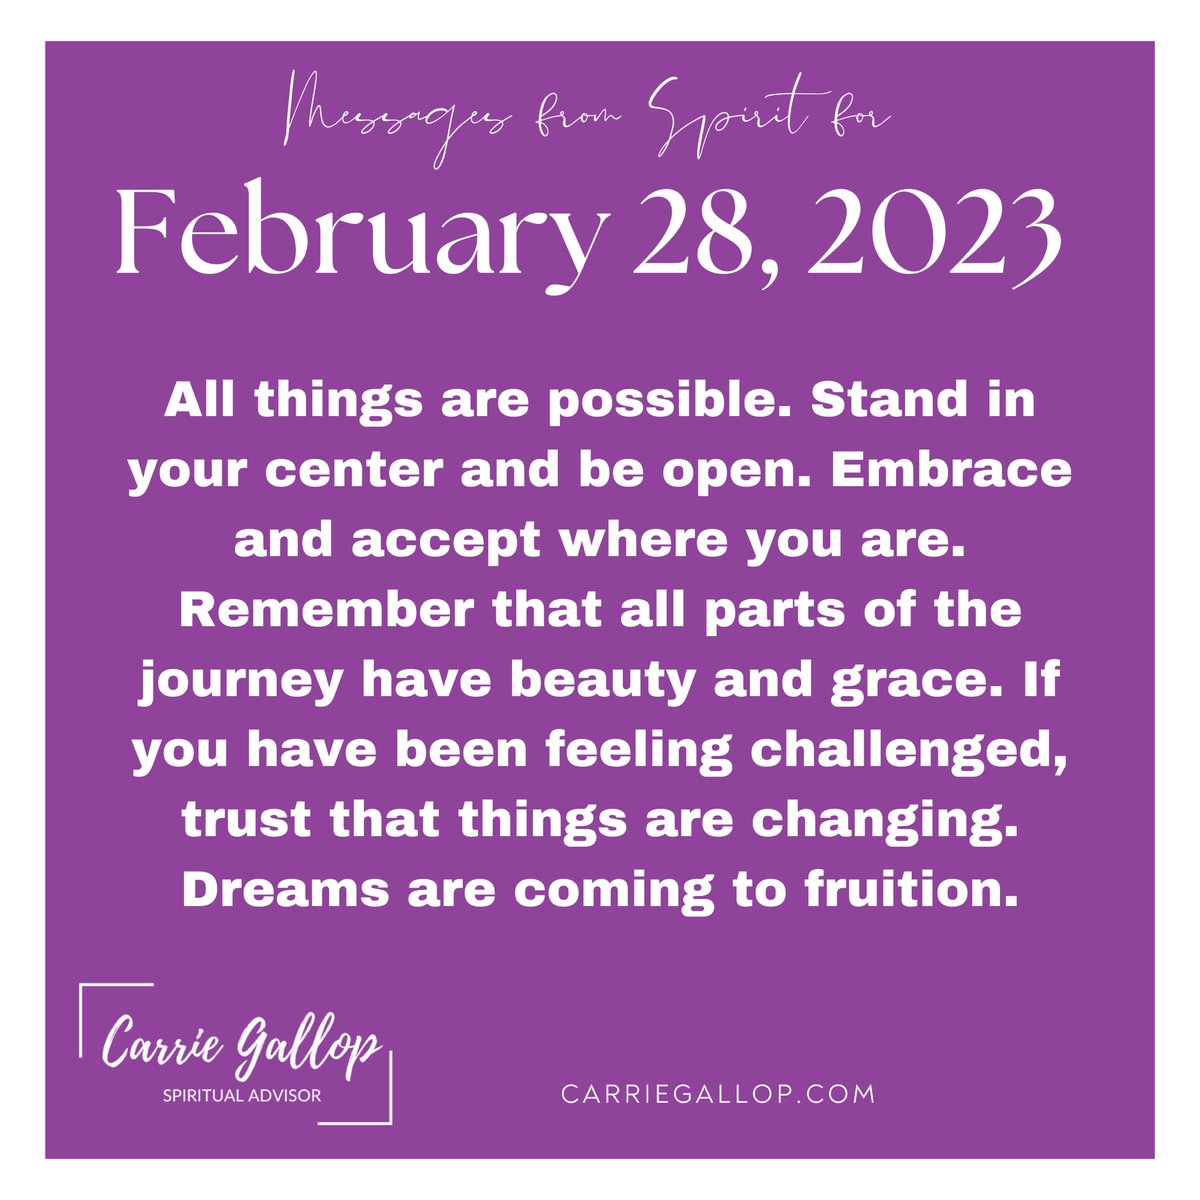 Messages From Spirit for February 28, 2023 ✨

#Daily #Guidance #Message #MessagesFromSpirit #February28 #Feb28 #AllThingsArePossible #Possibilities #Opportunities #Center #BeOpen #Embrace #Accept #Journey #Beauty #Grace #Challeneges #Changing #Change #Trust #Dreams